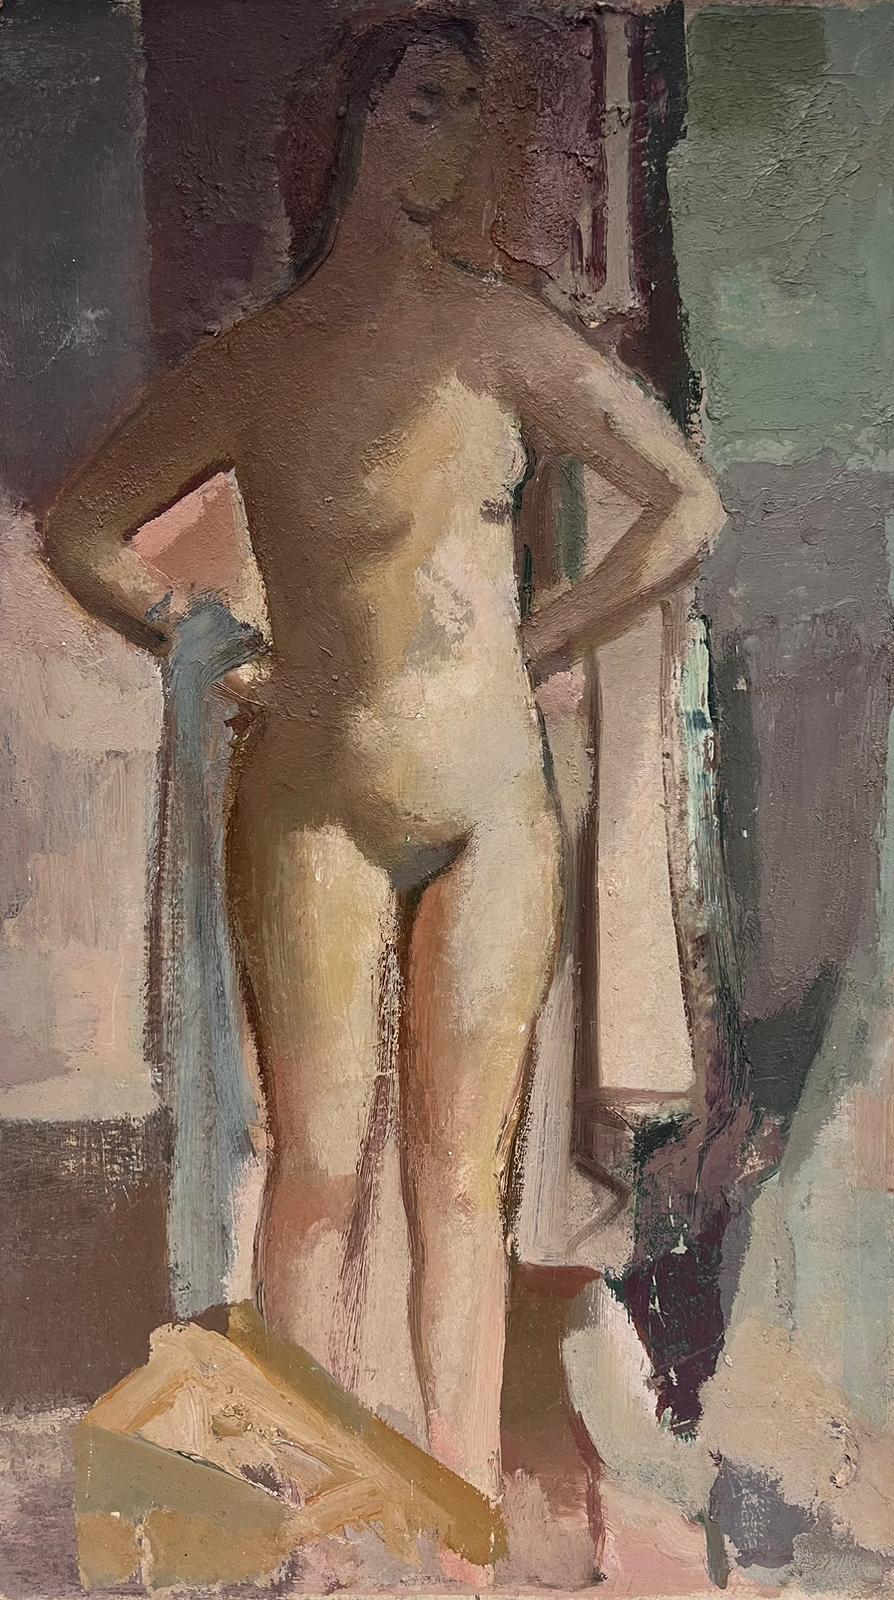 British 1960's Figurative Painting - Large 1960's British Modernist Oil Painting Tall Nude Lady Standing in Studio